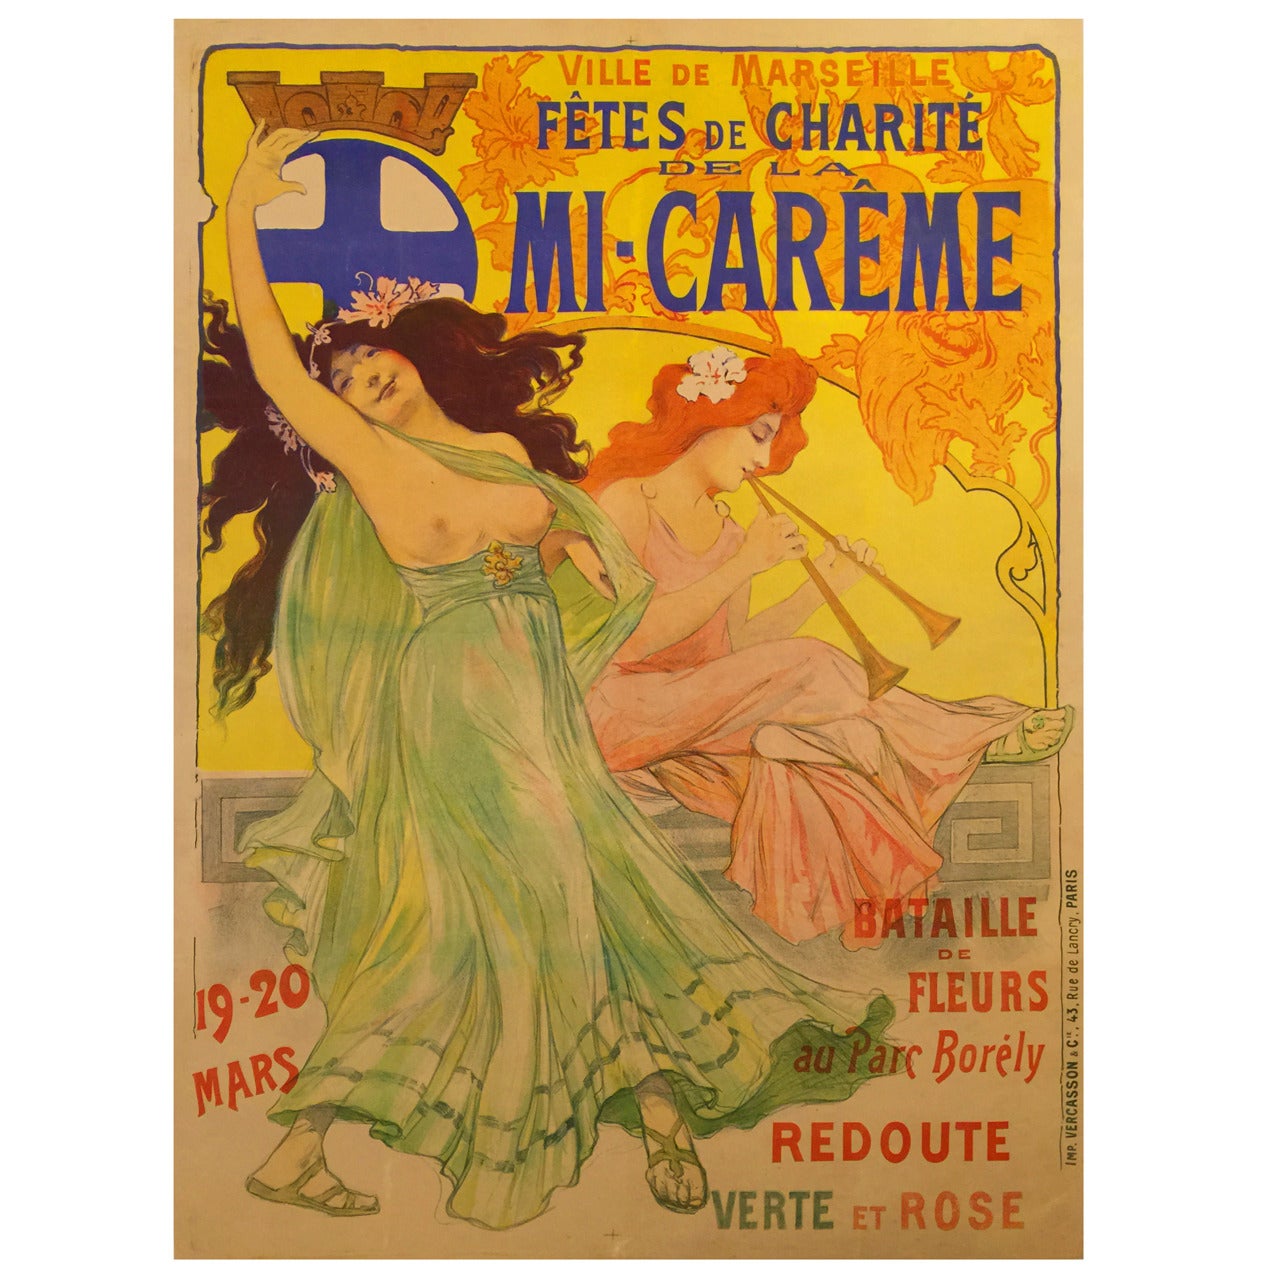 Rare Art Nouveau Period French Advertising Poster for a Festival in Marseille For Sale